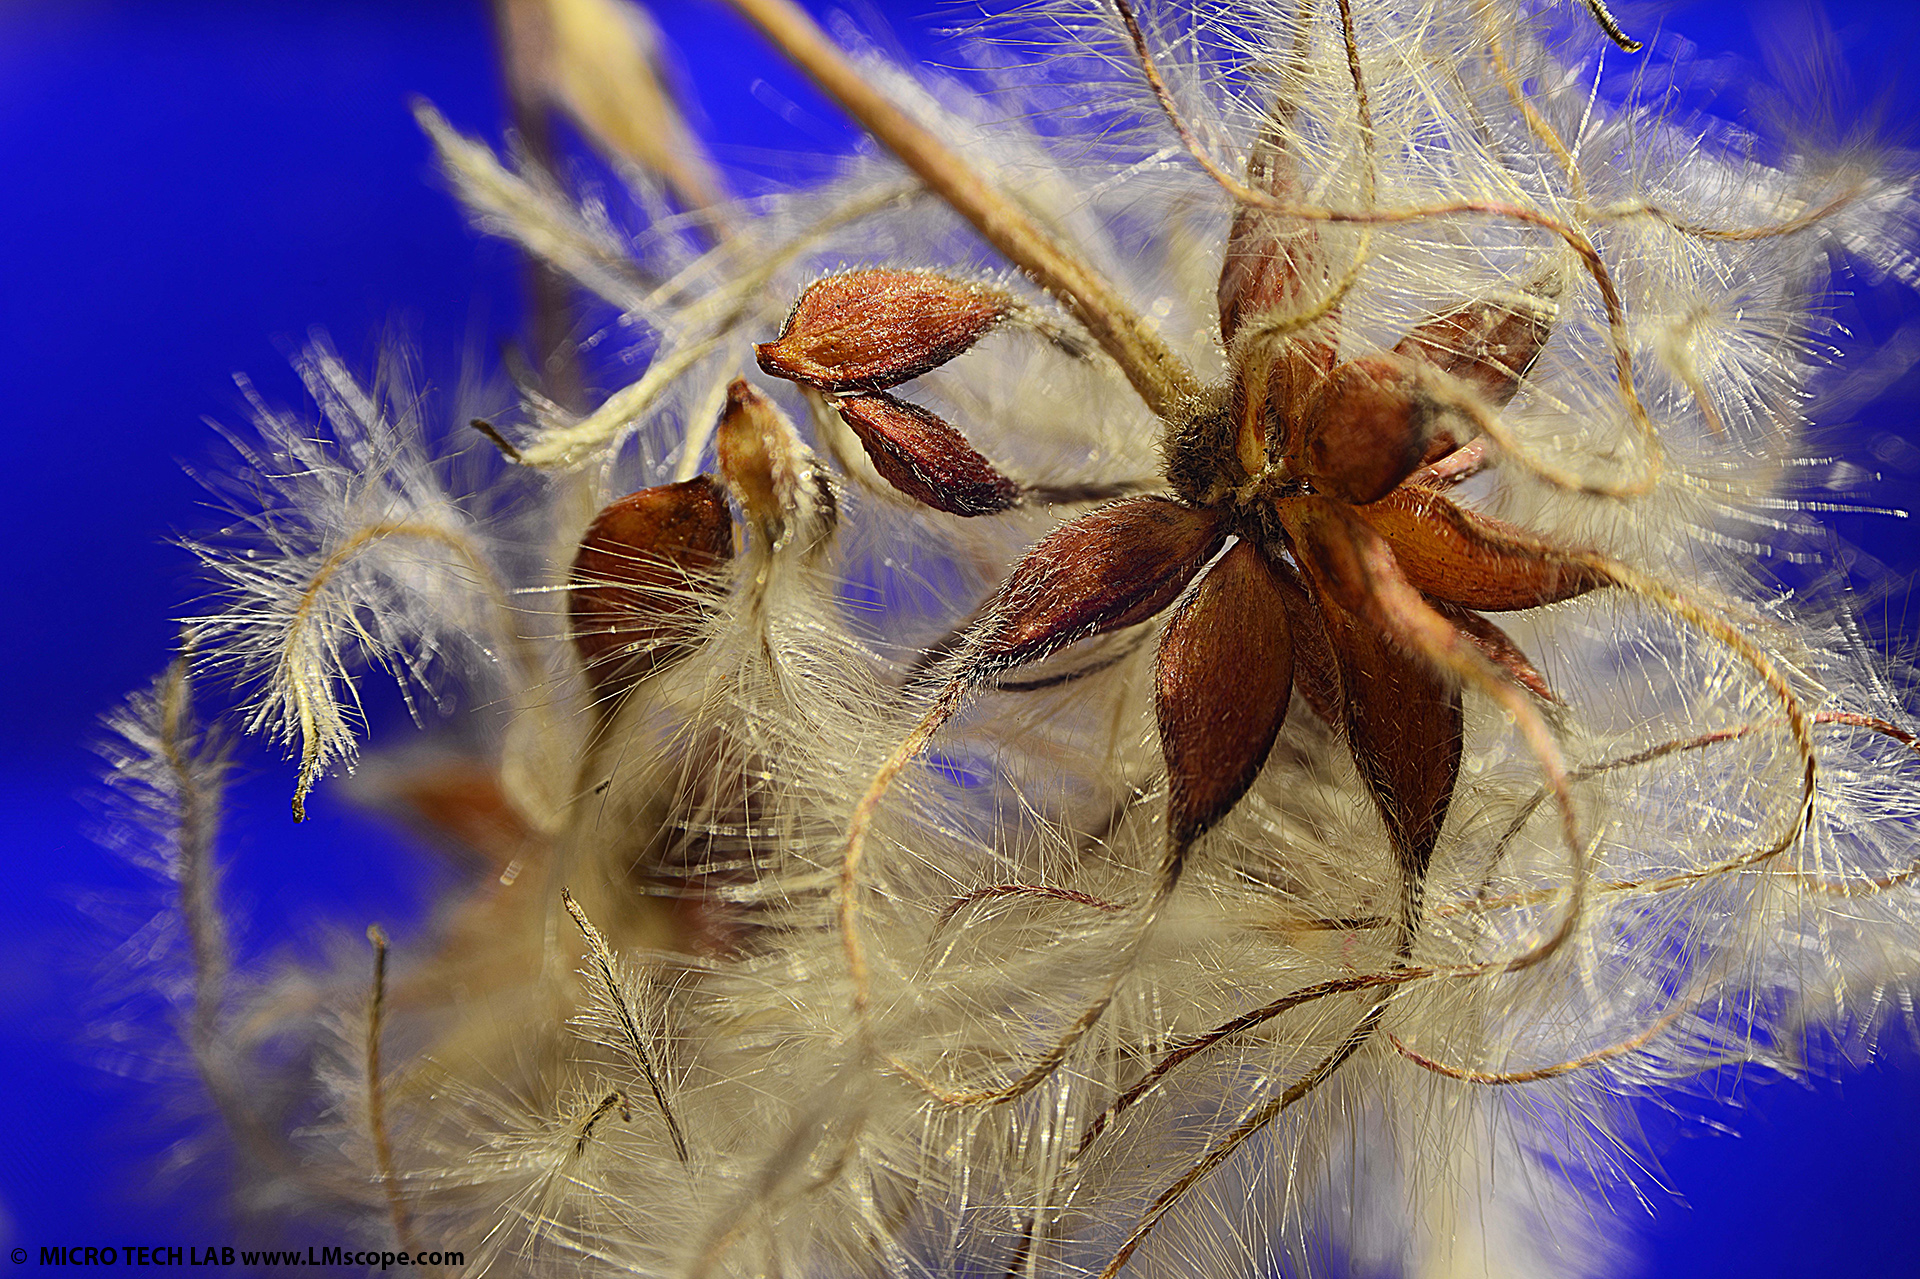 Seeds of common clematis